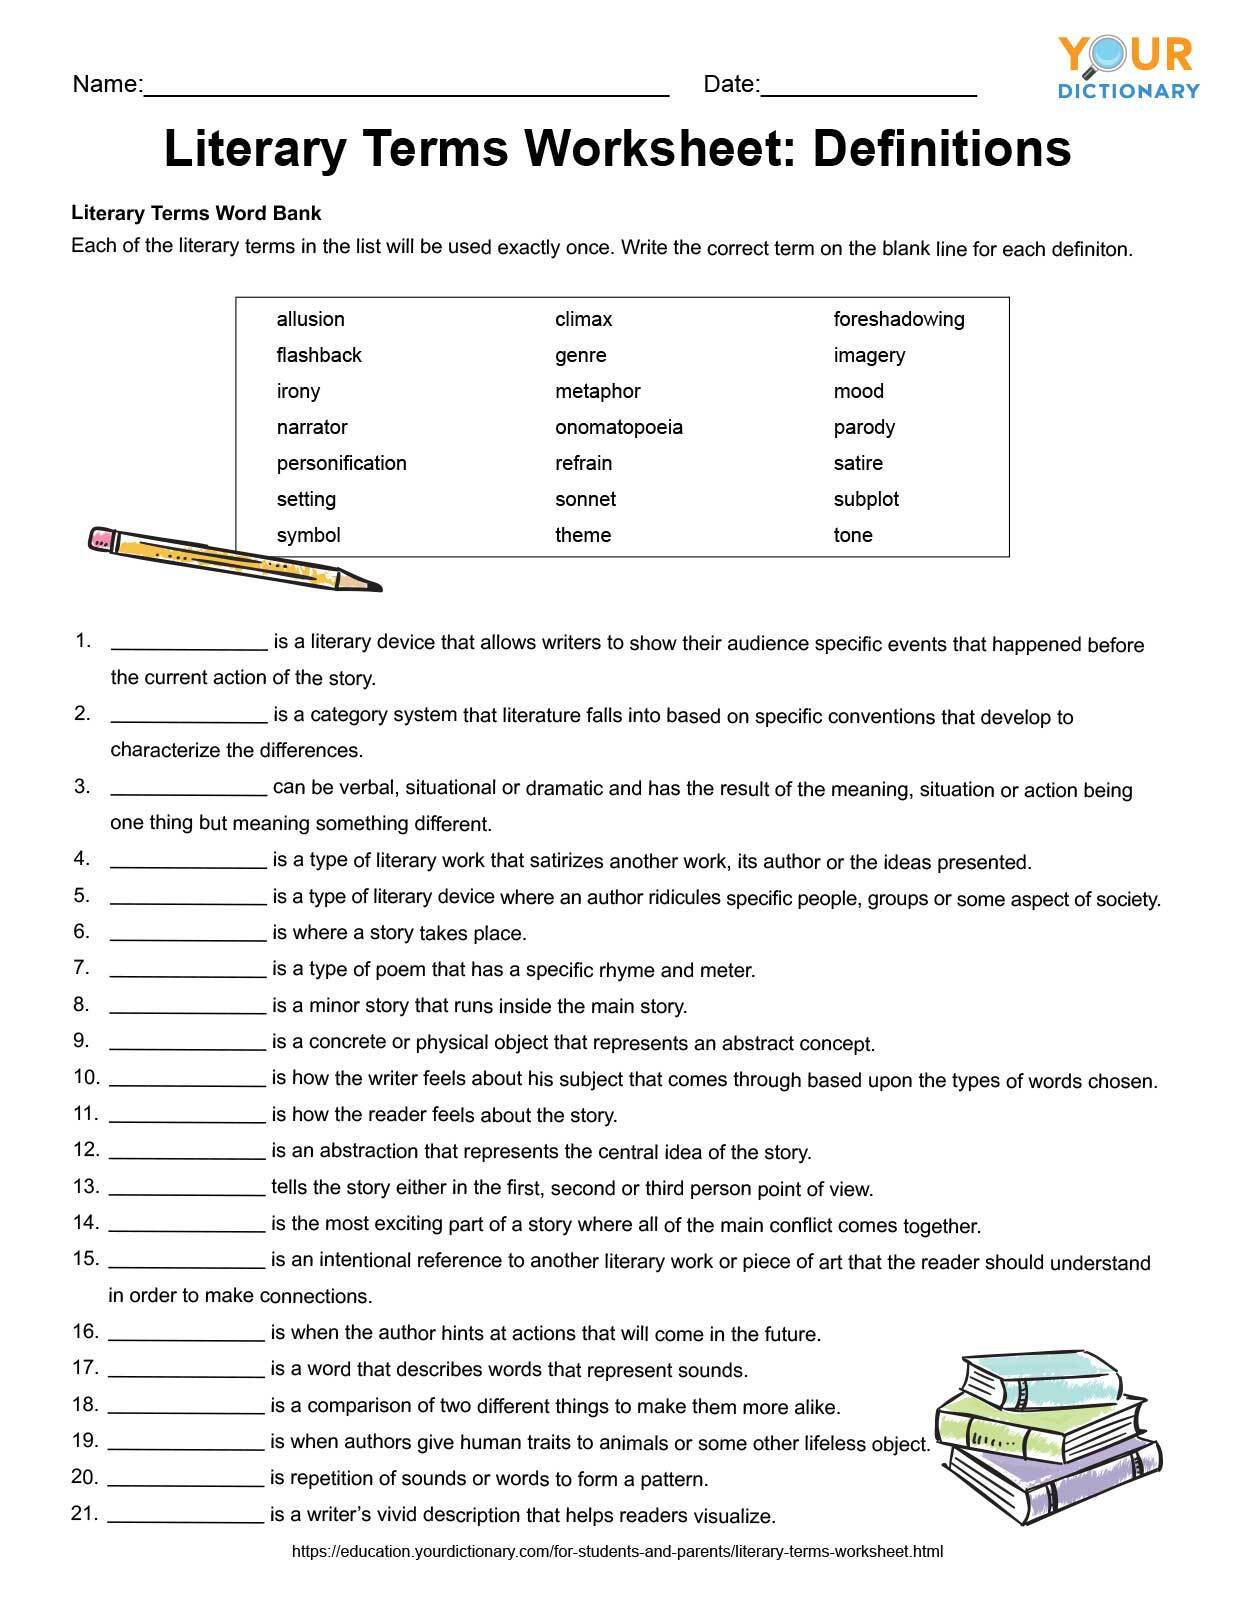 literary terms worksheet definitions